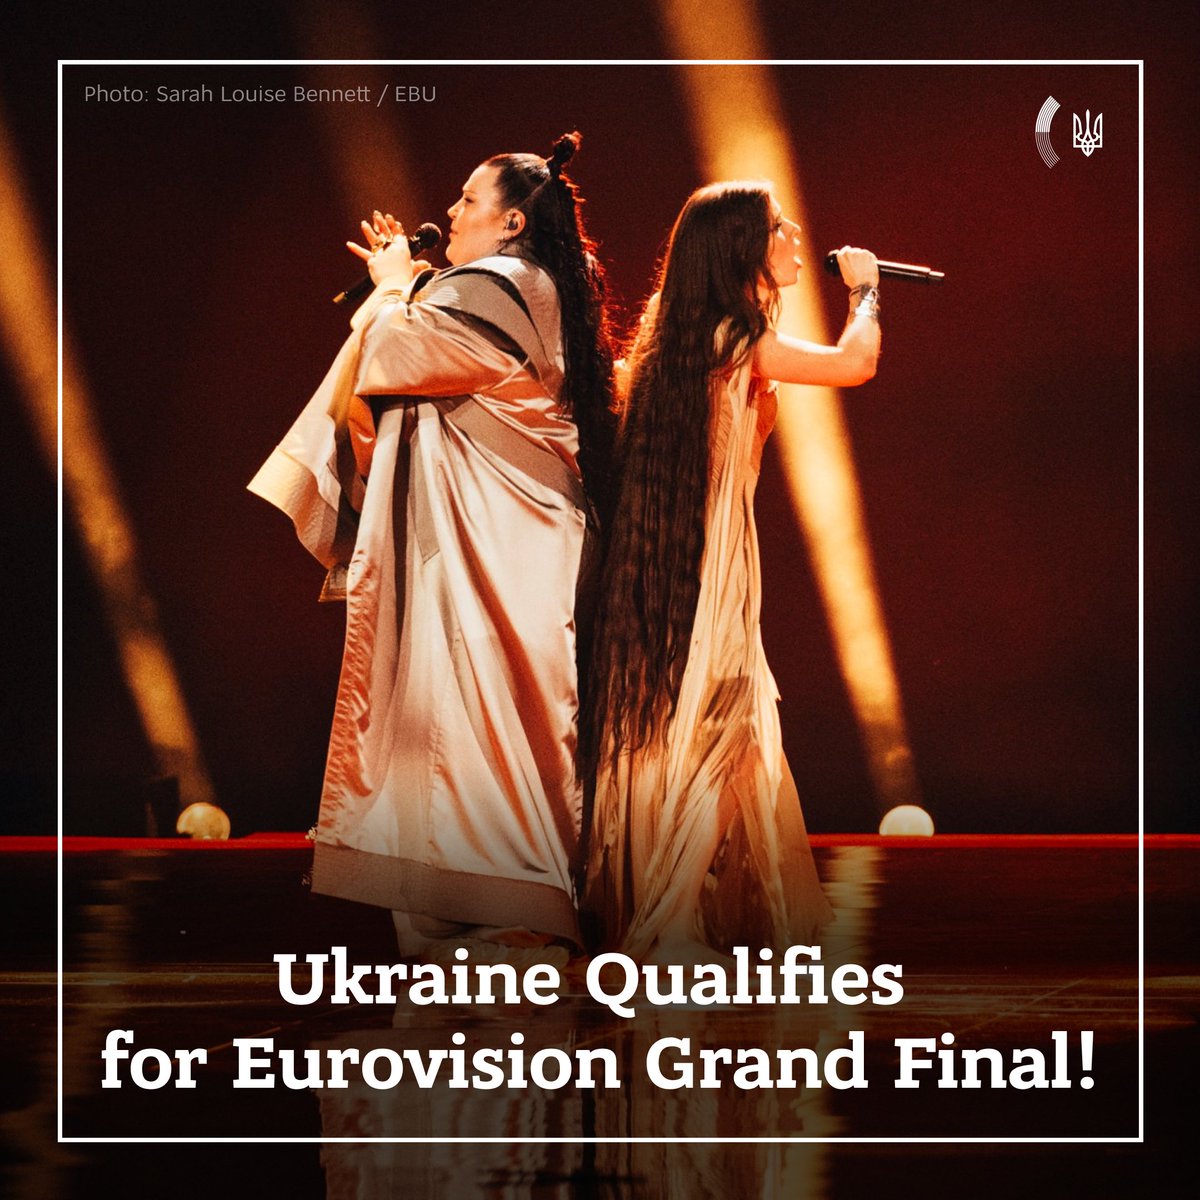 alyona alyona and Jerry Heil have made it to the #Eurovision2024 final with the song 'Teresa & Maria'. So, Ukraine remains the only country that qualified for the final every time it participated 🇺🇦 Now it's time to have our fingers crossed for the final performance on May 11!